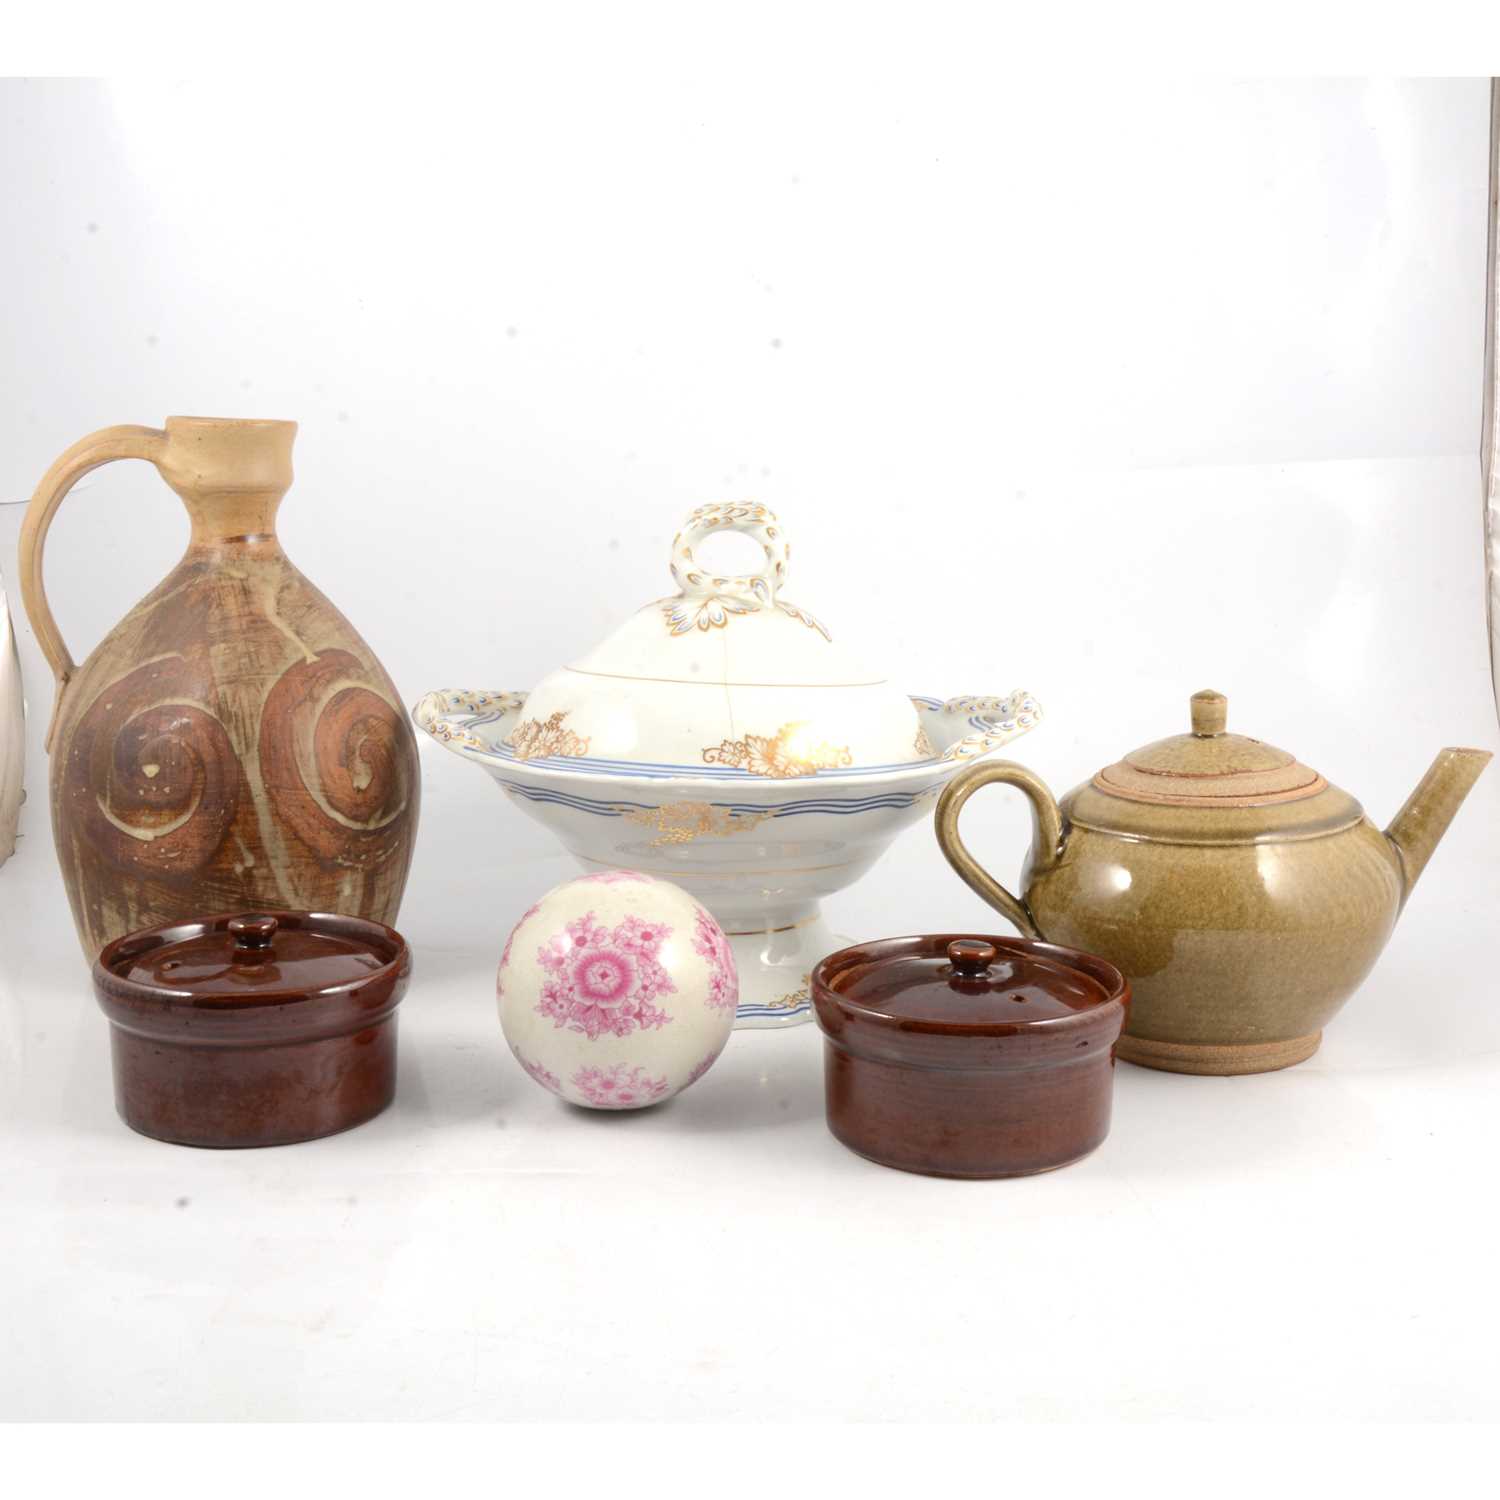 Lot 59 - A collection of decorative ceramics and glassware